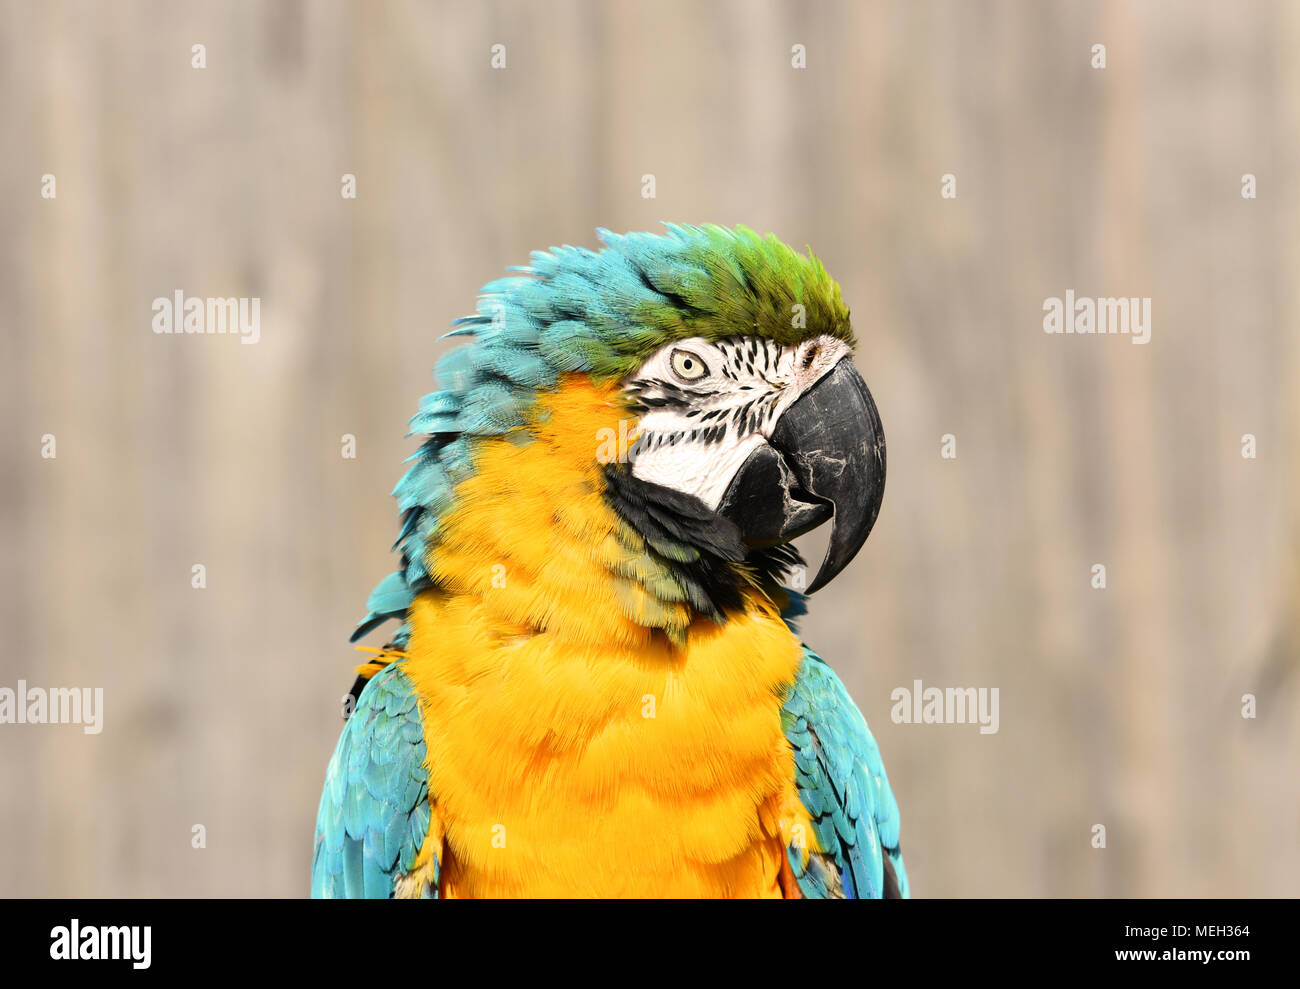 Turquoise and gold macaw parrot Stock Photo